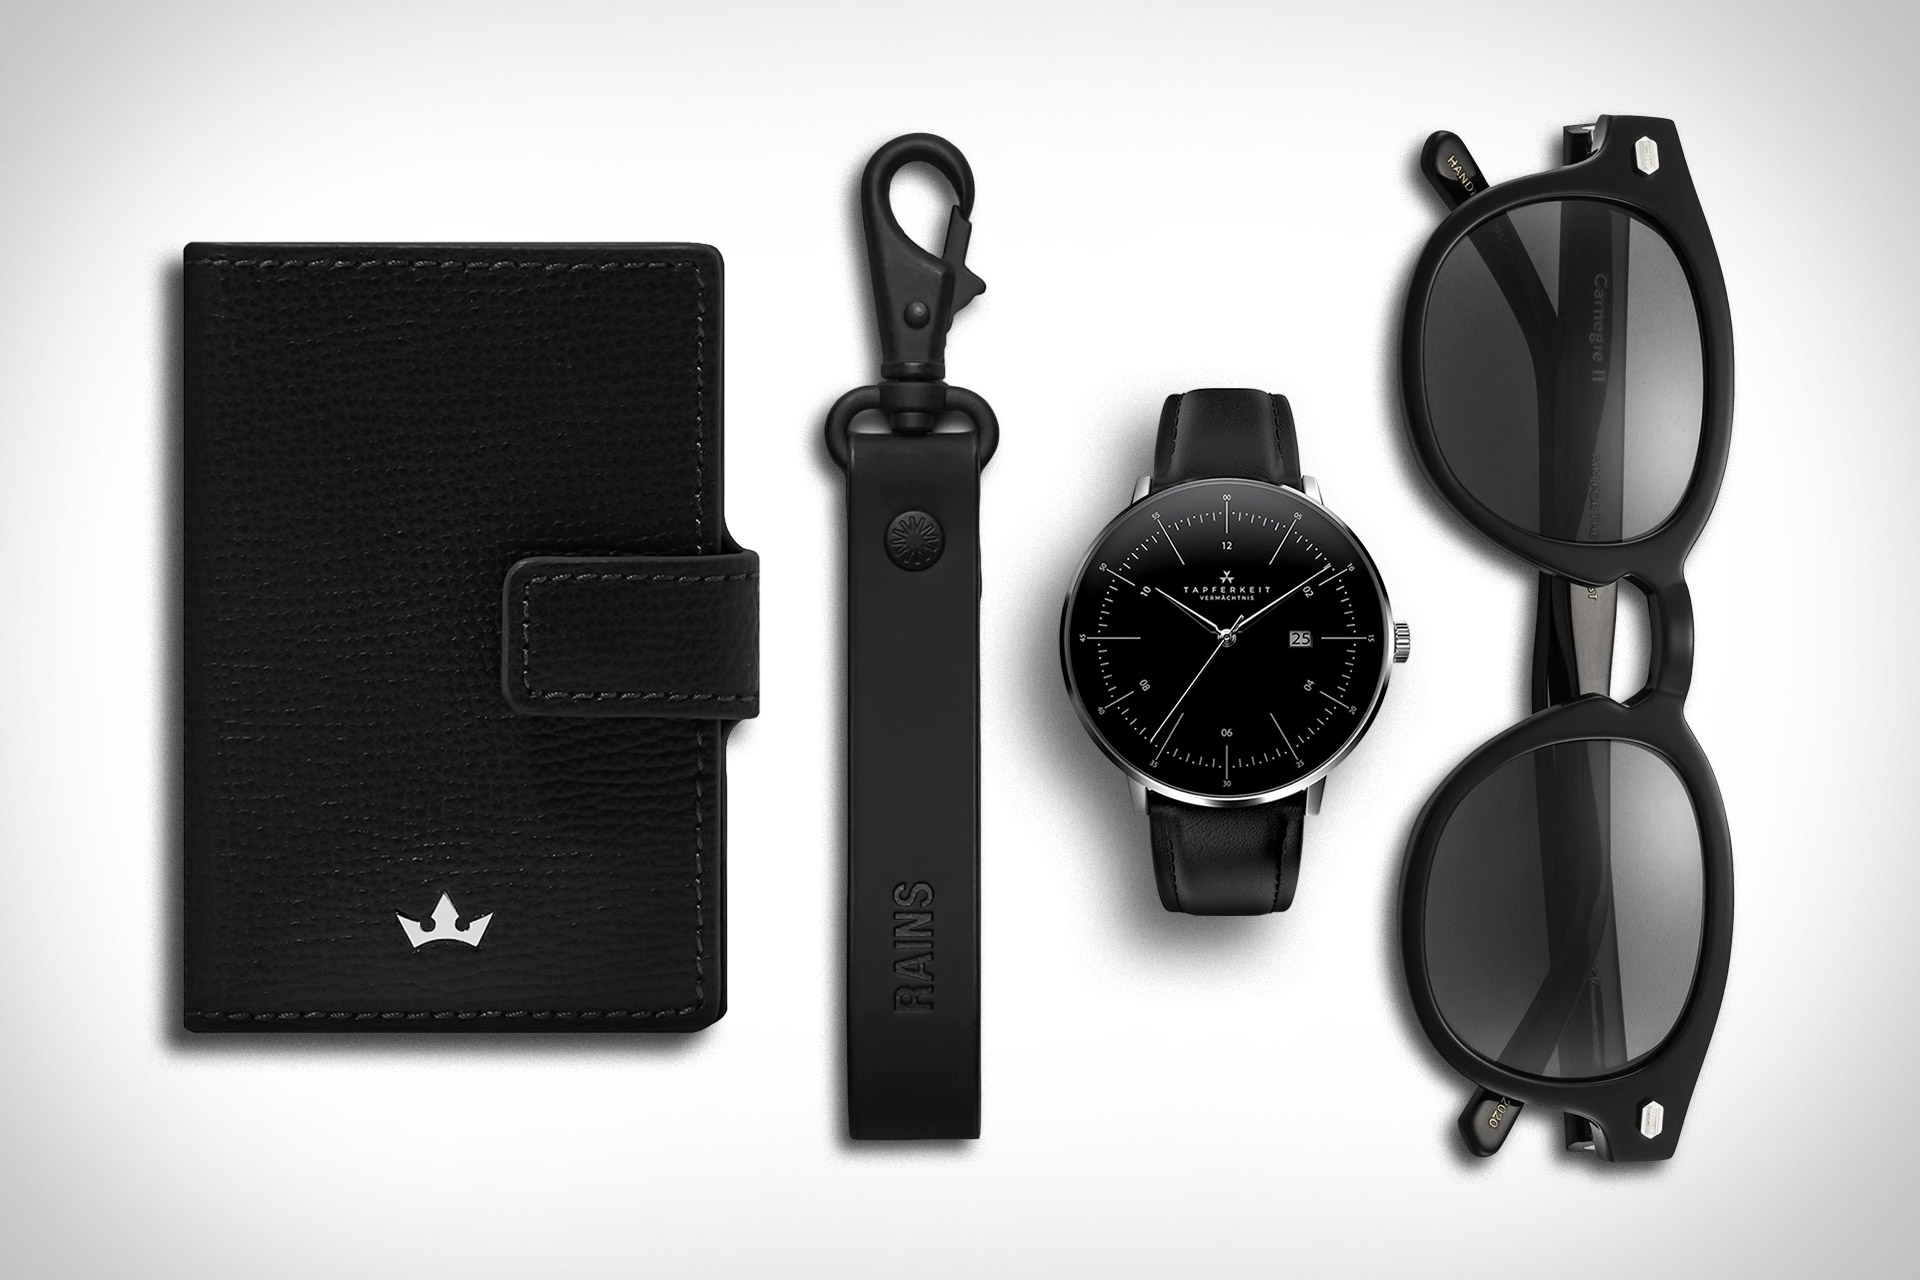 Everyday Carry: On Time | Uncrate, #Everyday #Carry #Time #Uncrate